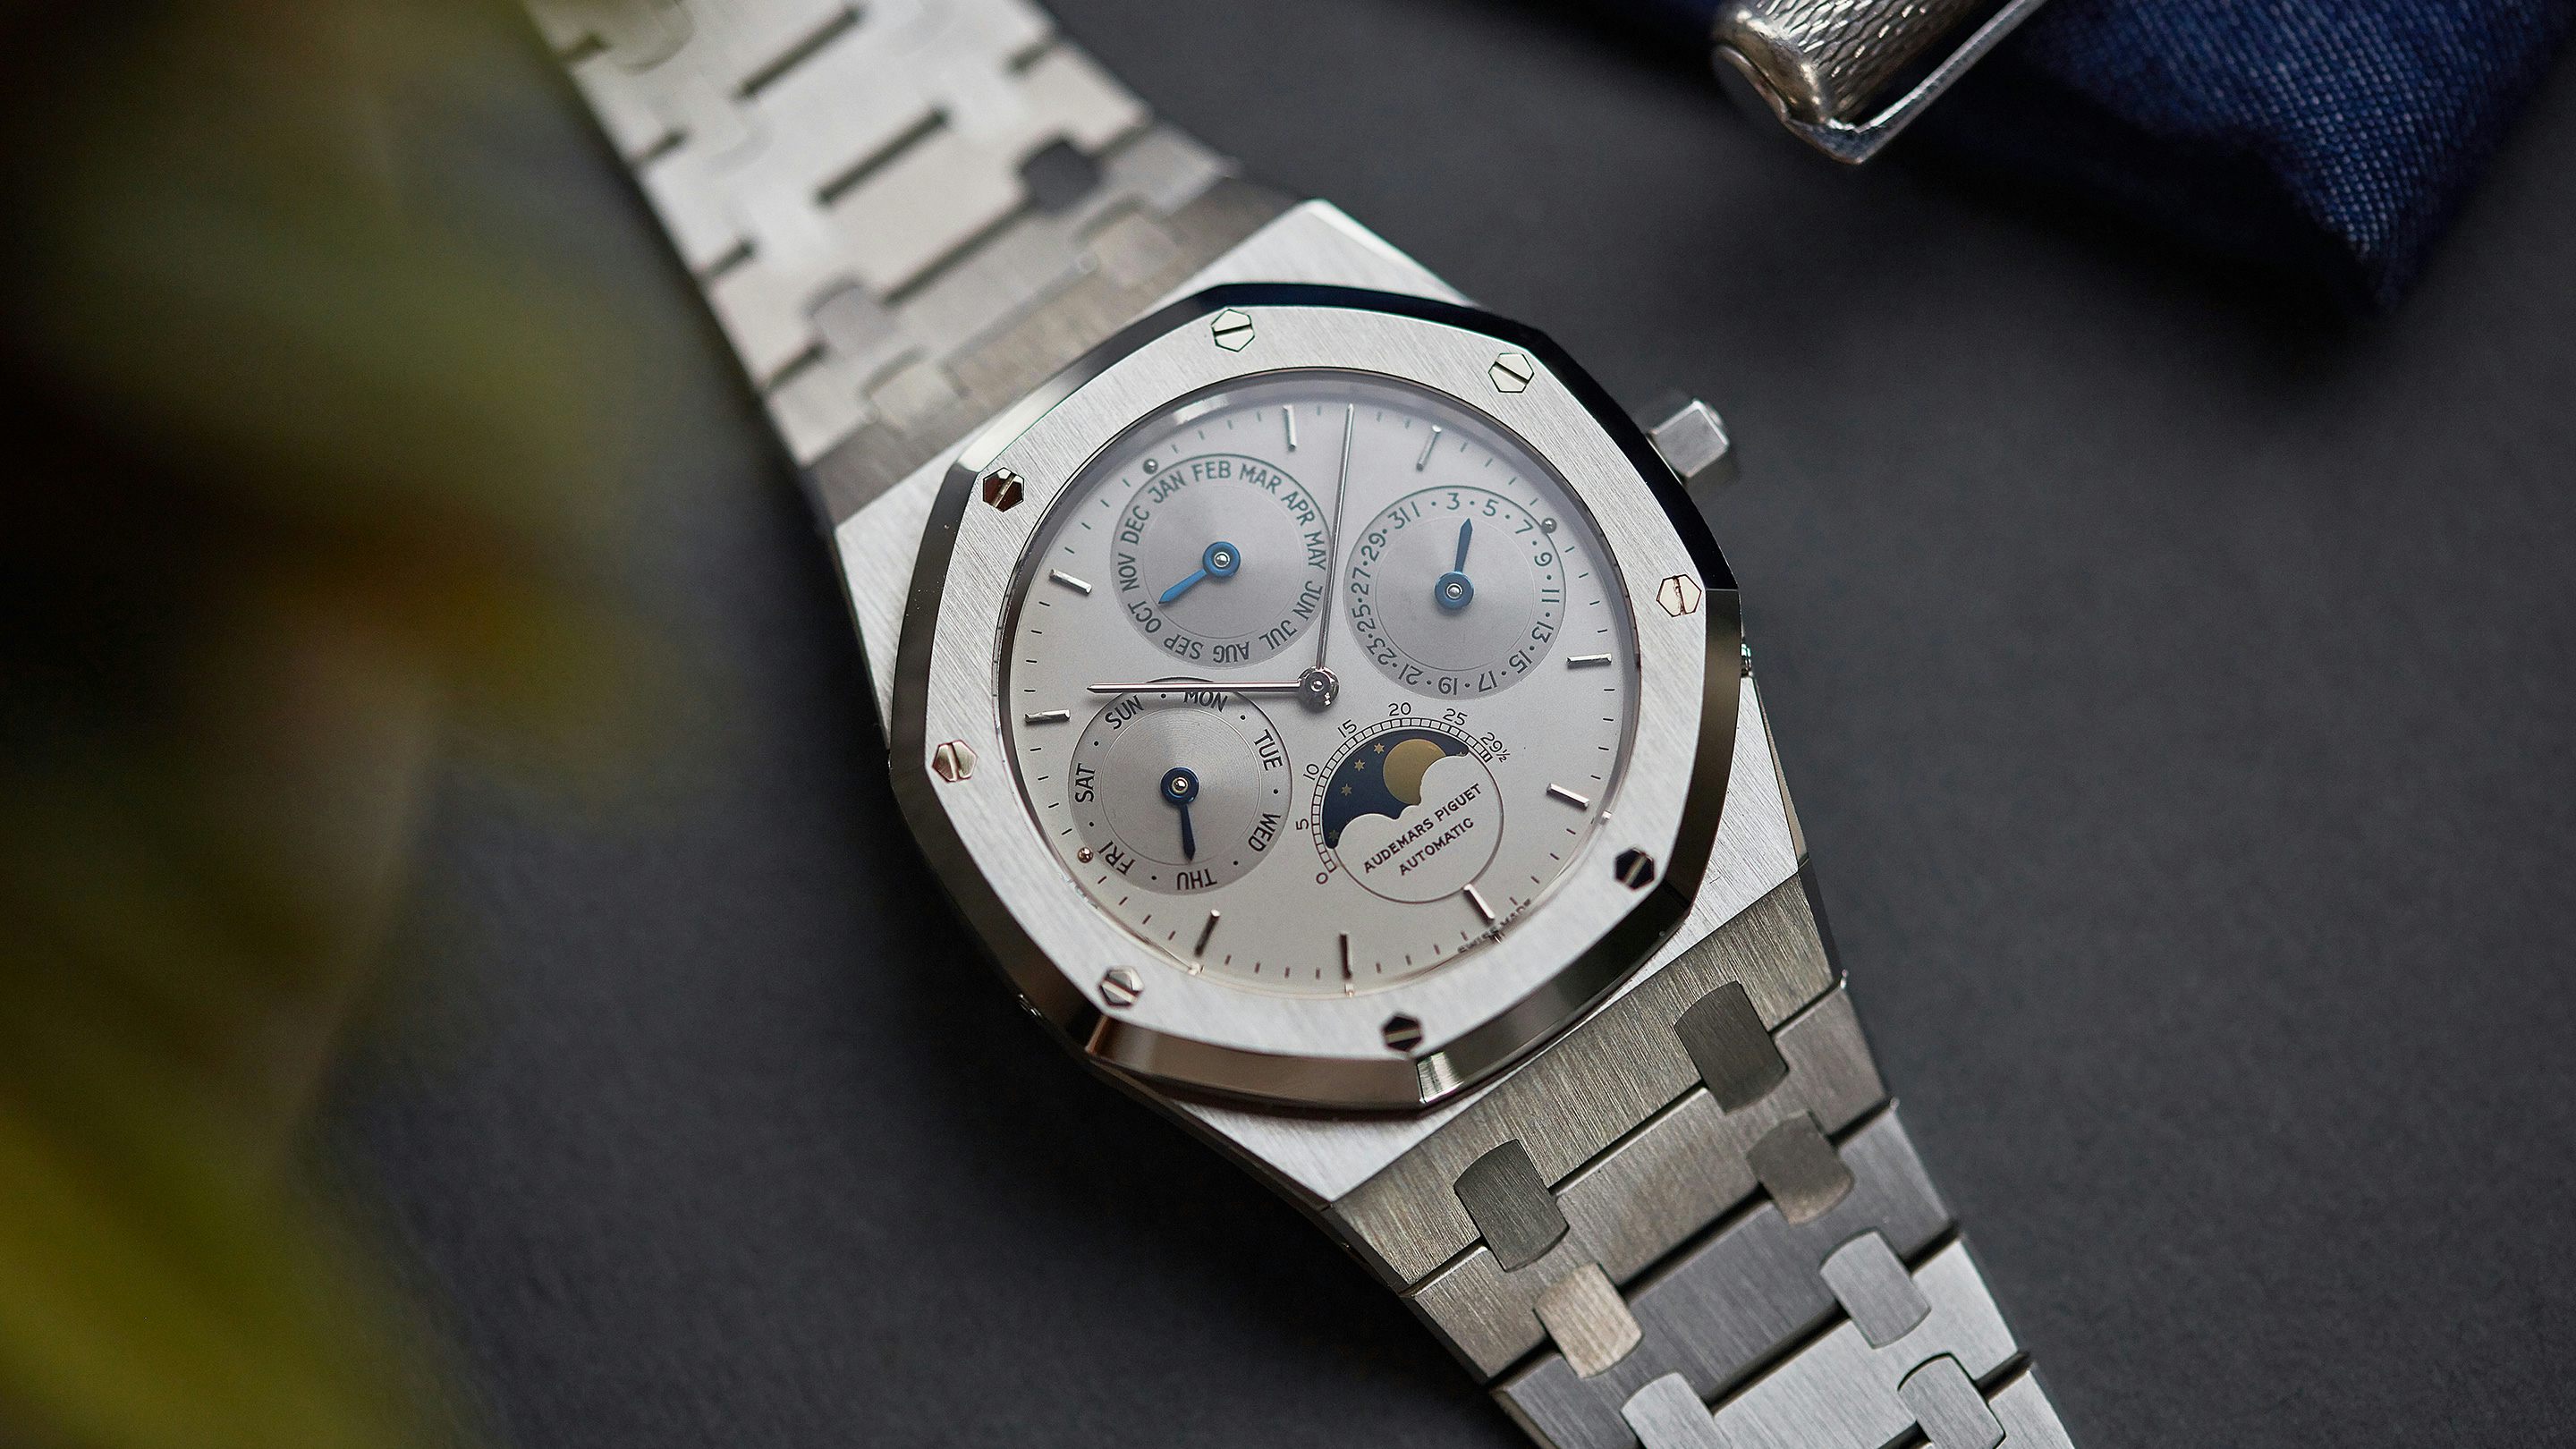 The Fascinating Story Behind Audemars Piguet's Iconic Royal Oak in